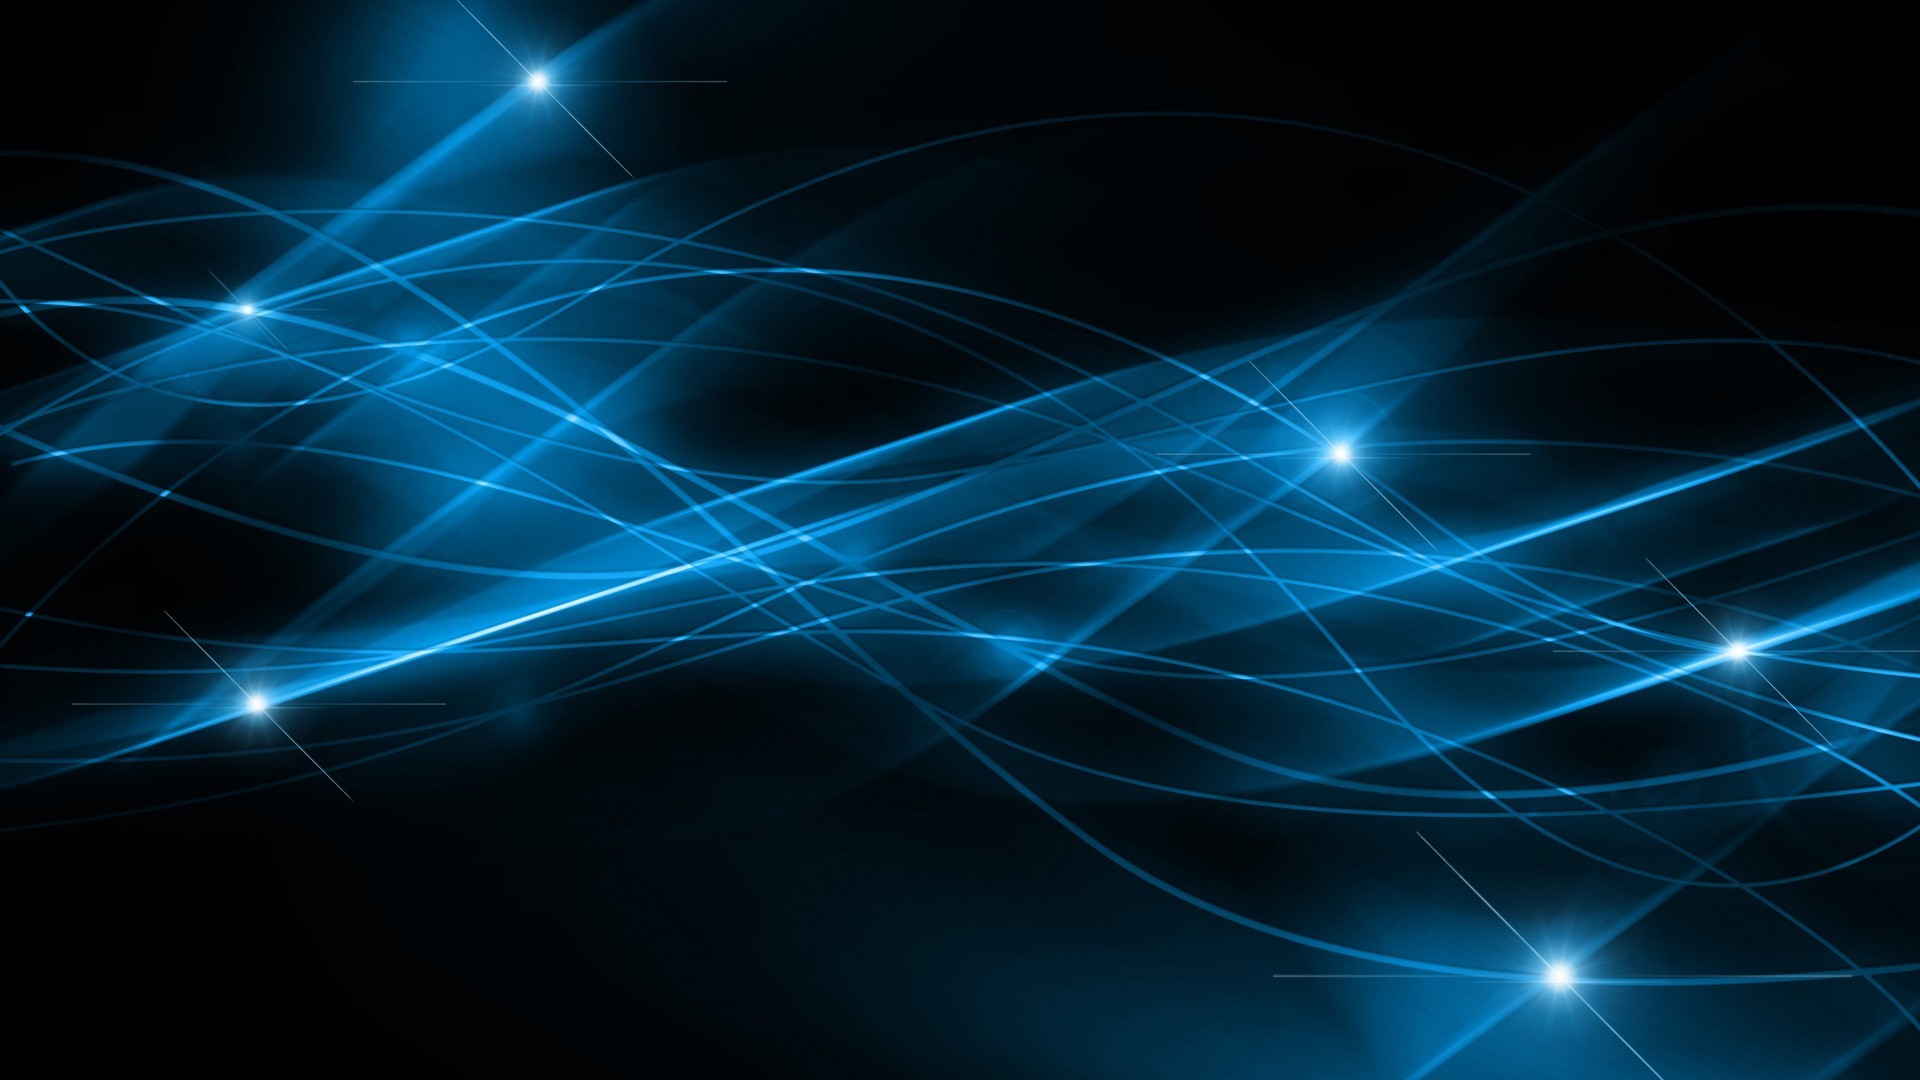 1080 • Black And Blue Abstract Backgrounds Hd 1080P 12 HD Wallpapers .